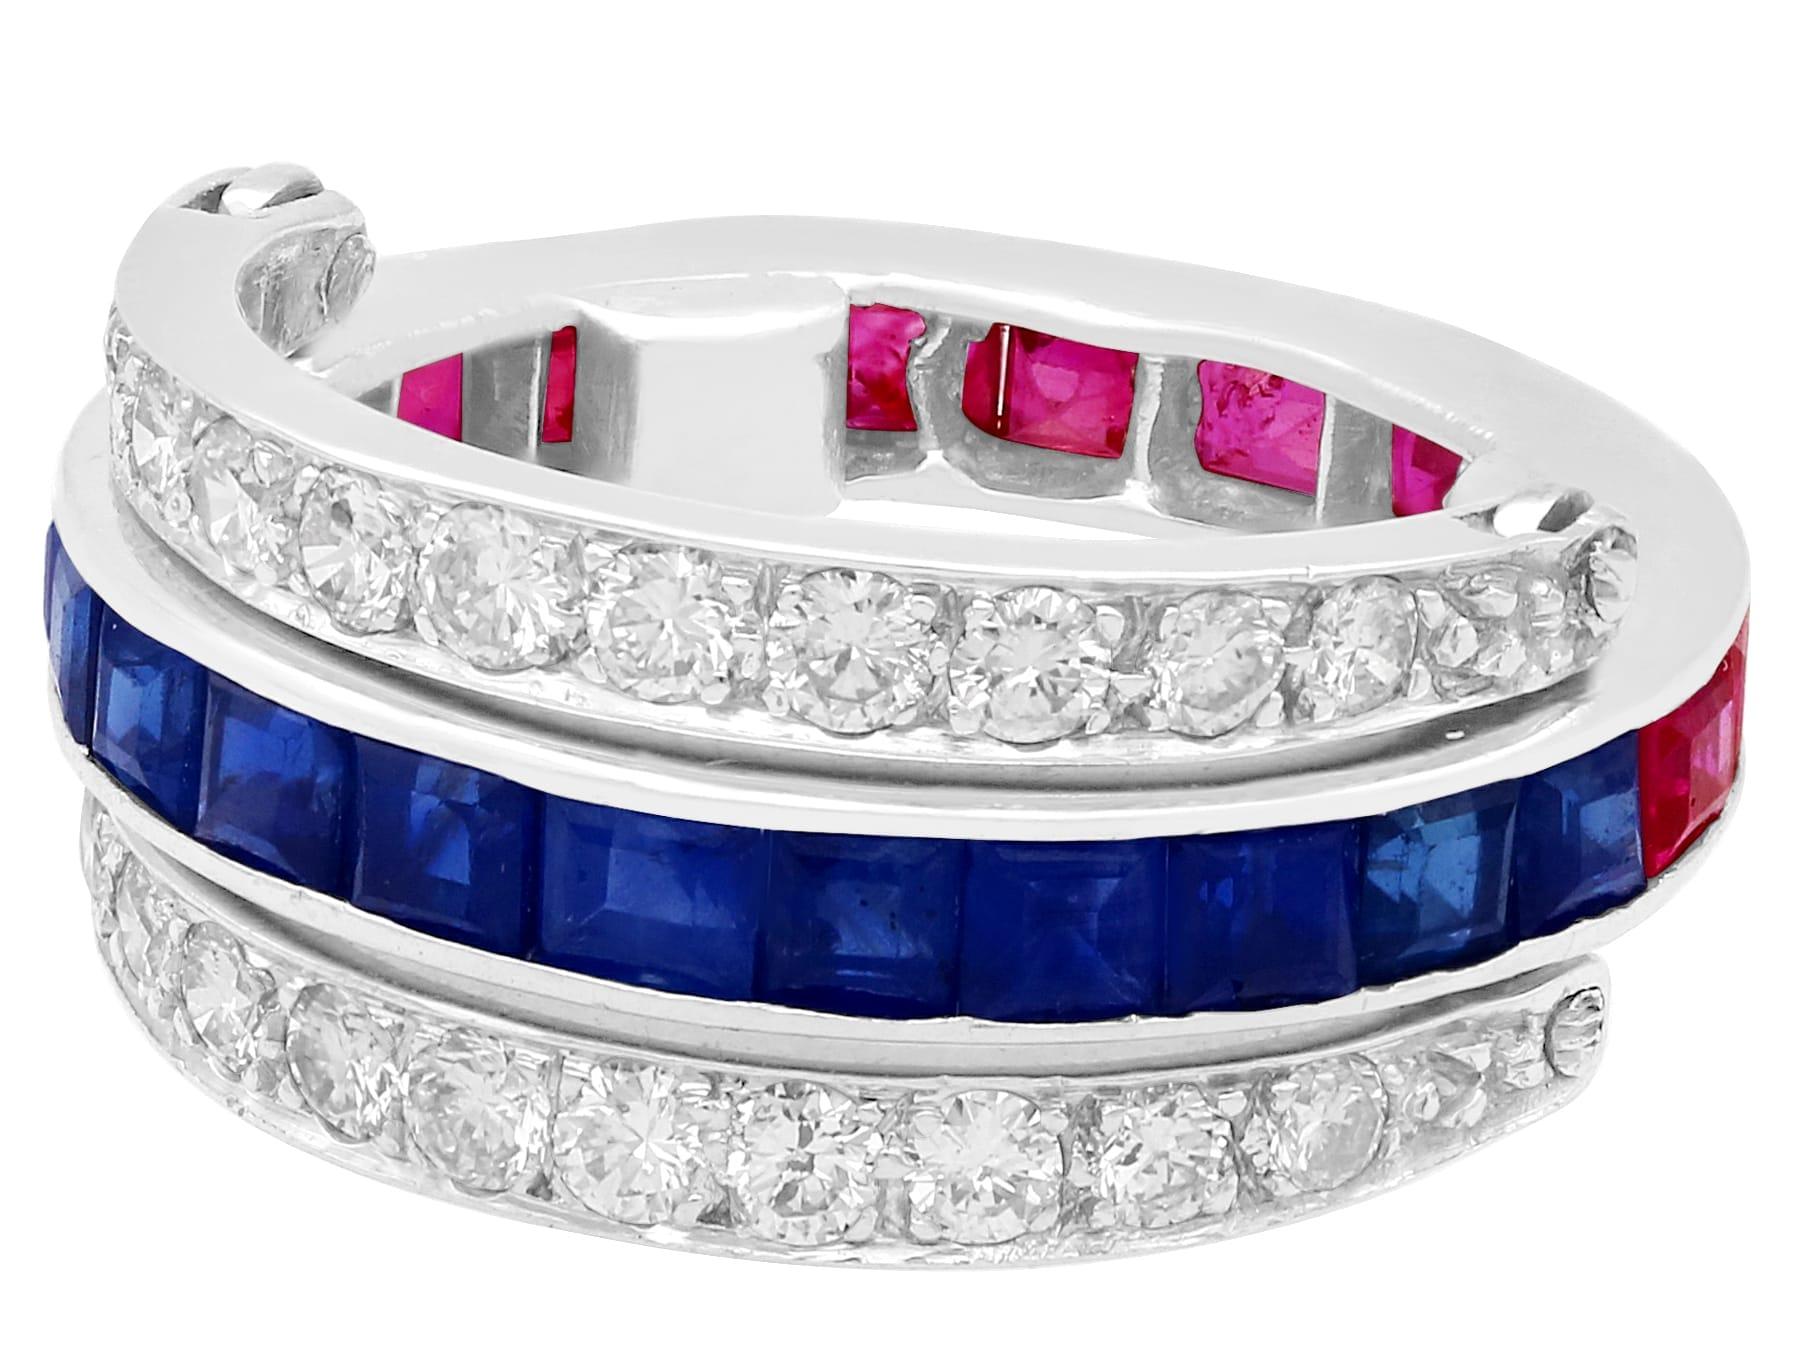 A stunning, fine and impressive vintage 1940s French 0.90 carat ruby, 0.90 carat sapphire and 0.80 carat diamond, platinum hinged bilateral ring; part of our diverse gemstone jewelry and estate jewelry collections.

This stunning vintage gemstone